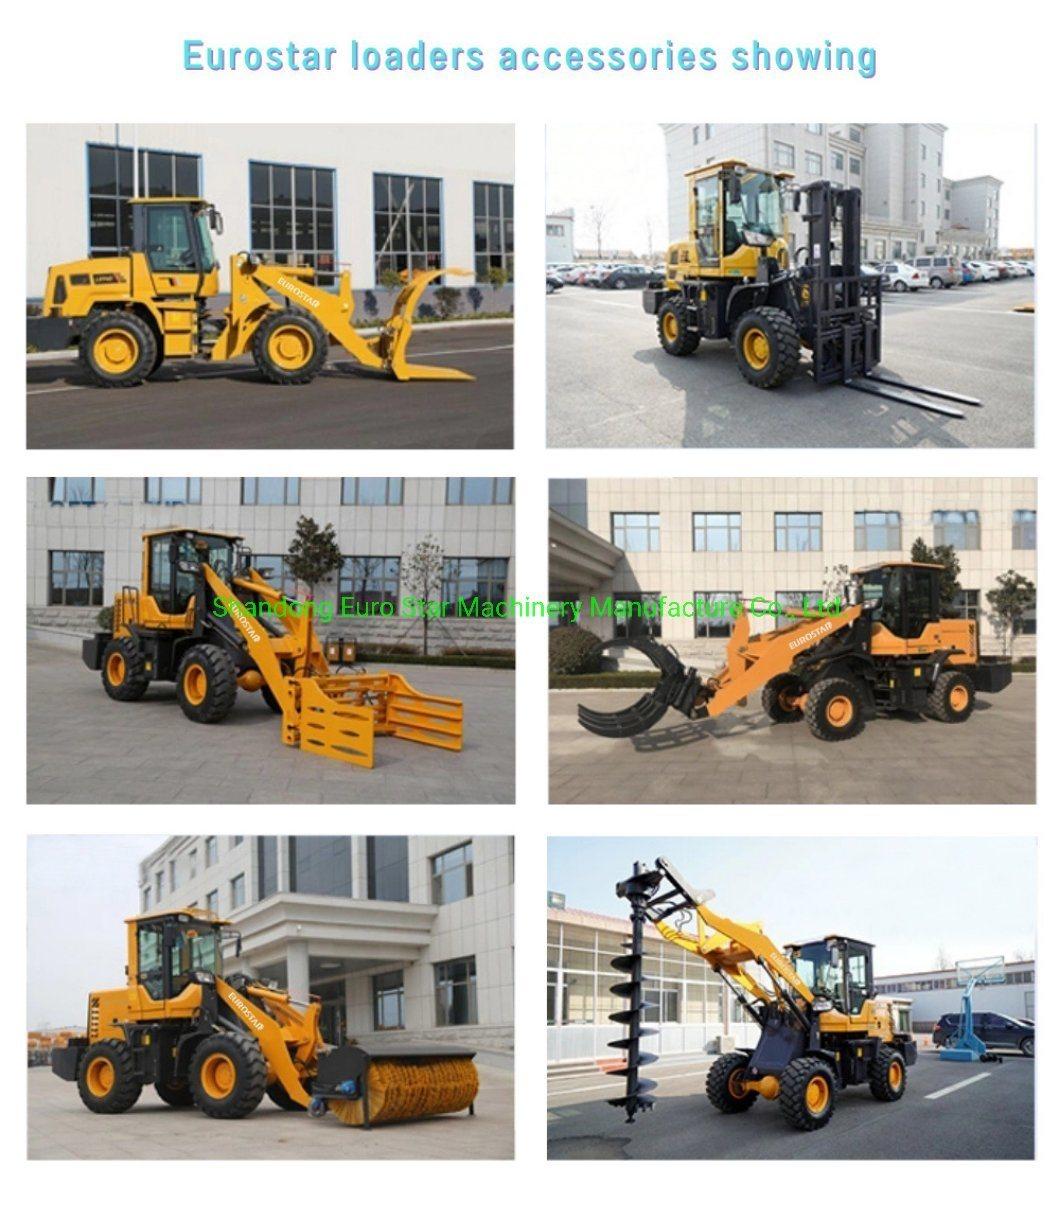 1.8t Articulated Multifunctional Mini Loader Wheel Loader Compact Hydraulic Loader Construction Machinery for Construction, Farm and Garden with CE